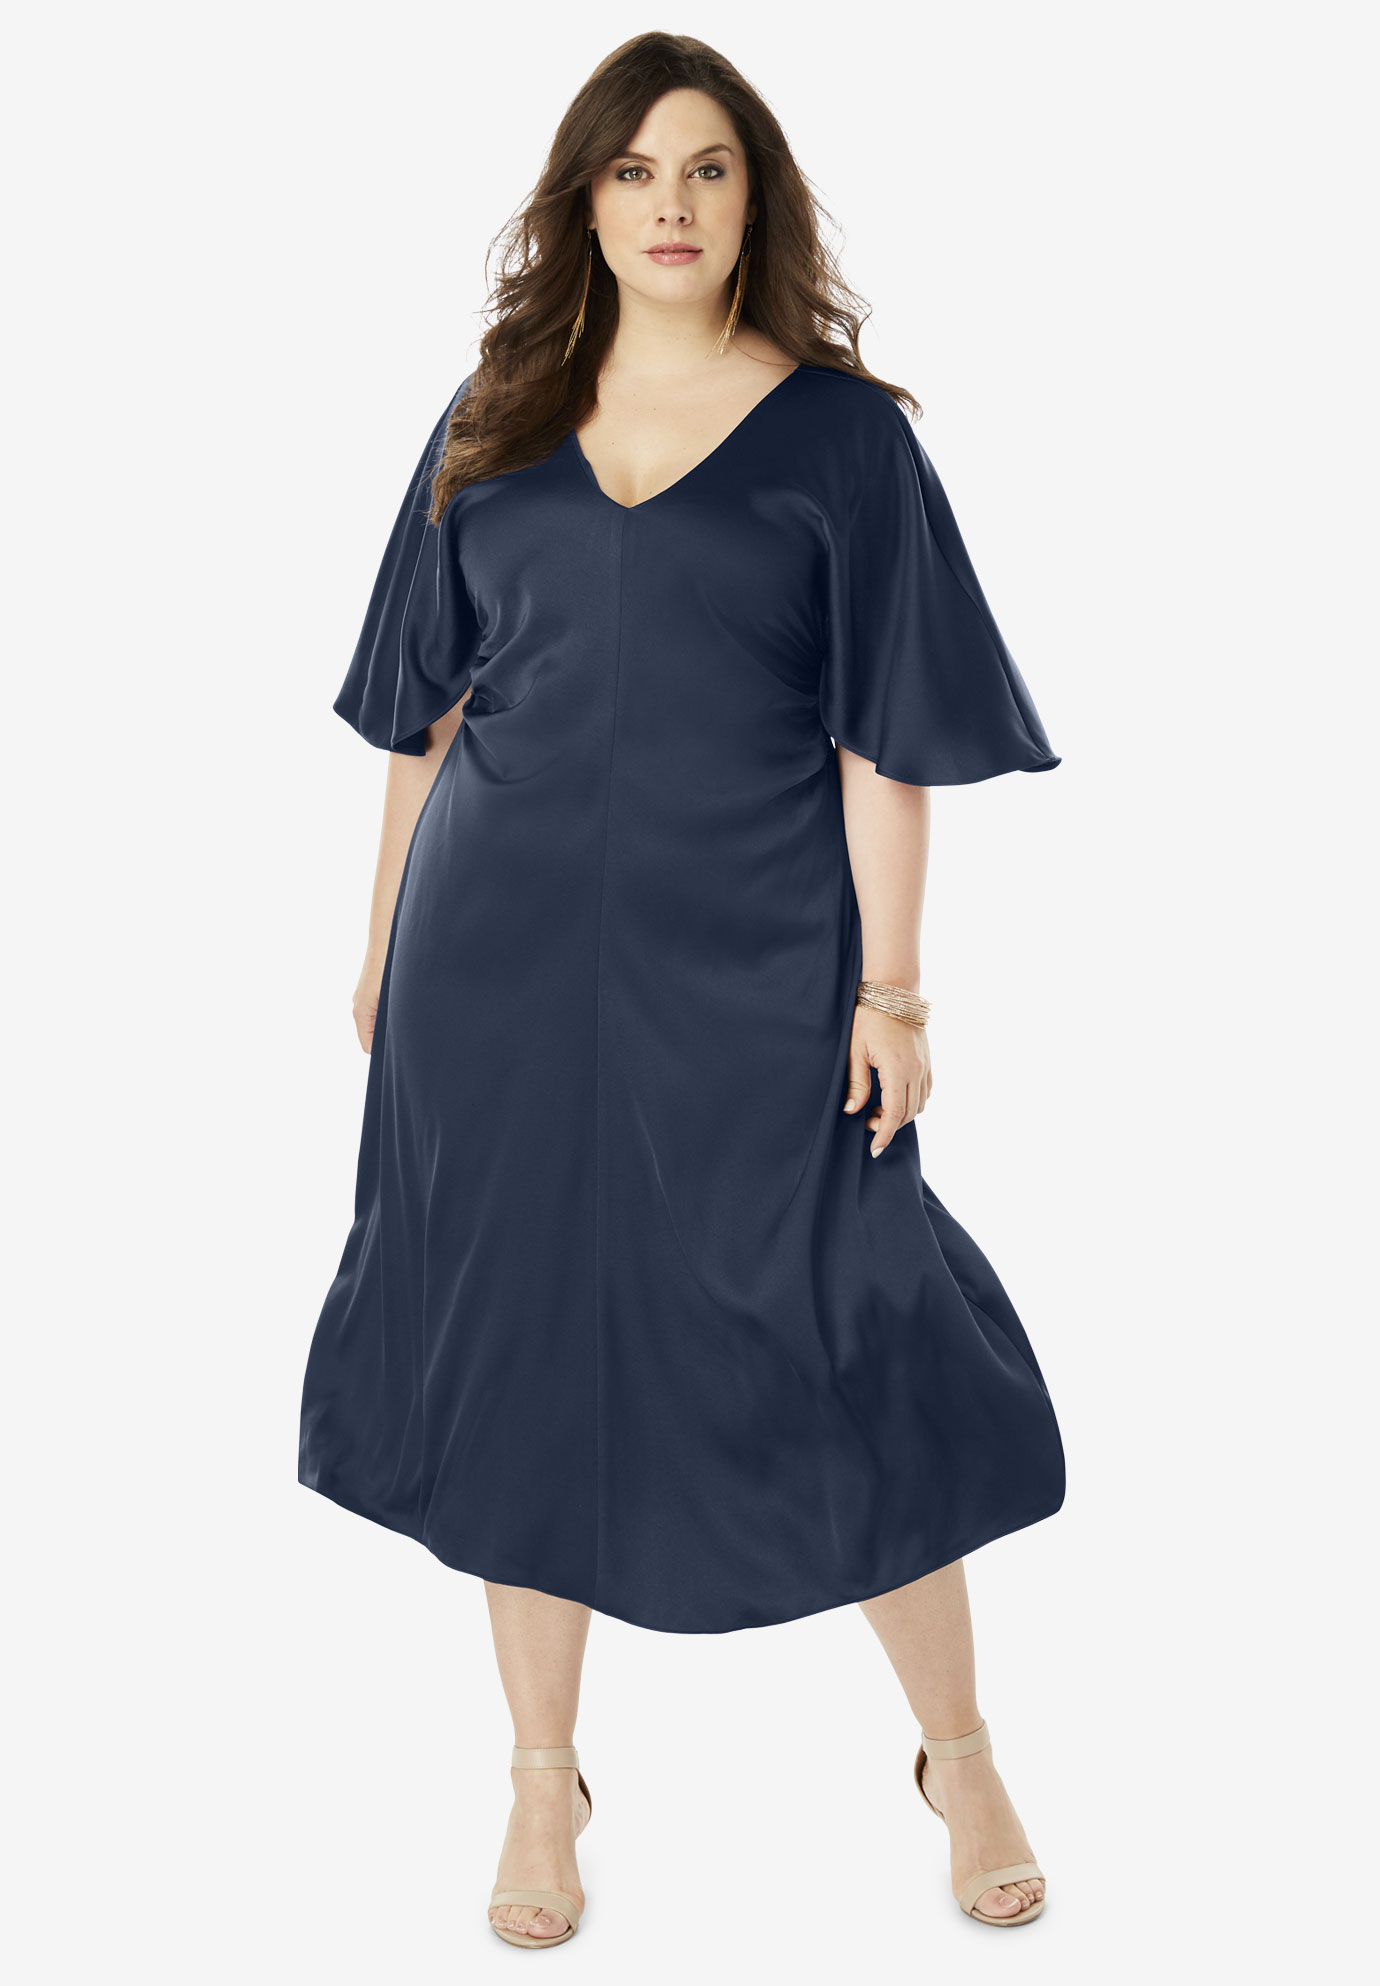 Ruched V-Neck Dress with Dolman Sleeves | Fullbeauty Outlet